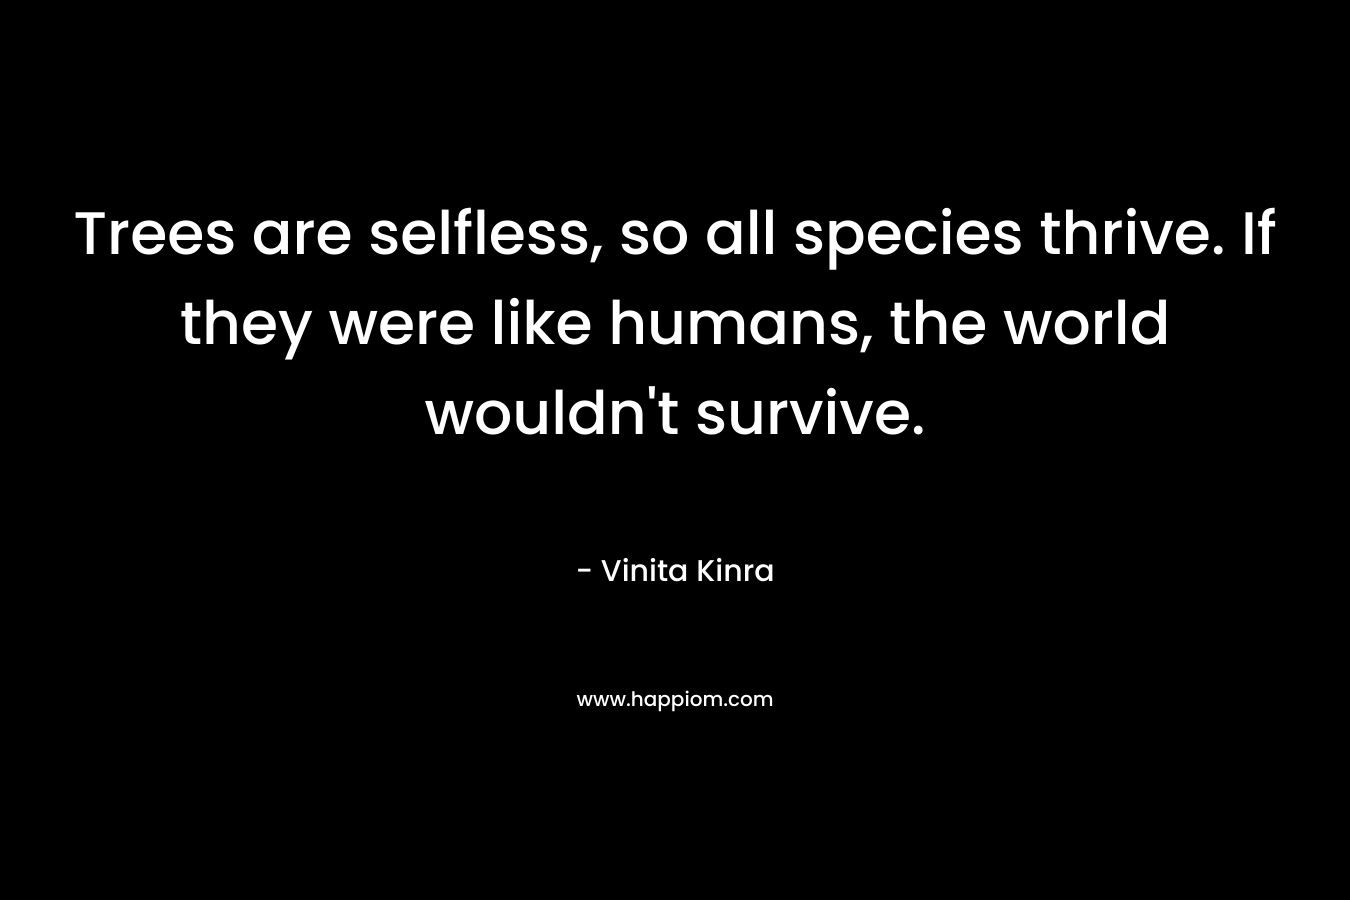 Trees are selfless, so all species thrive. If they were like humans, the world wouldn’t survive. – Vinita Kinra